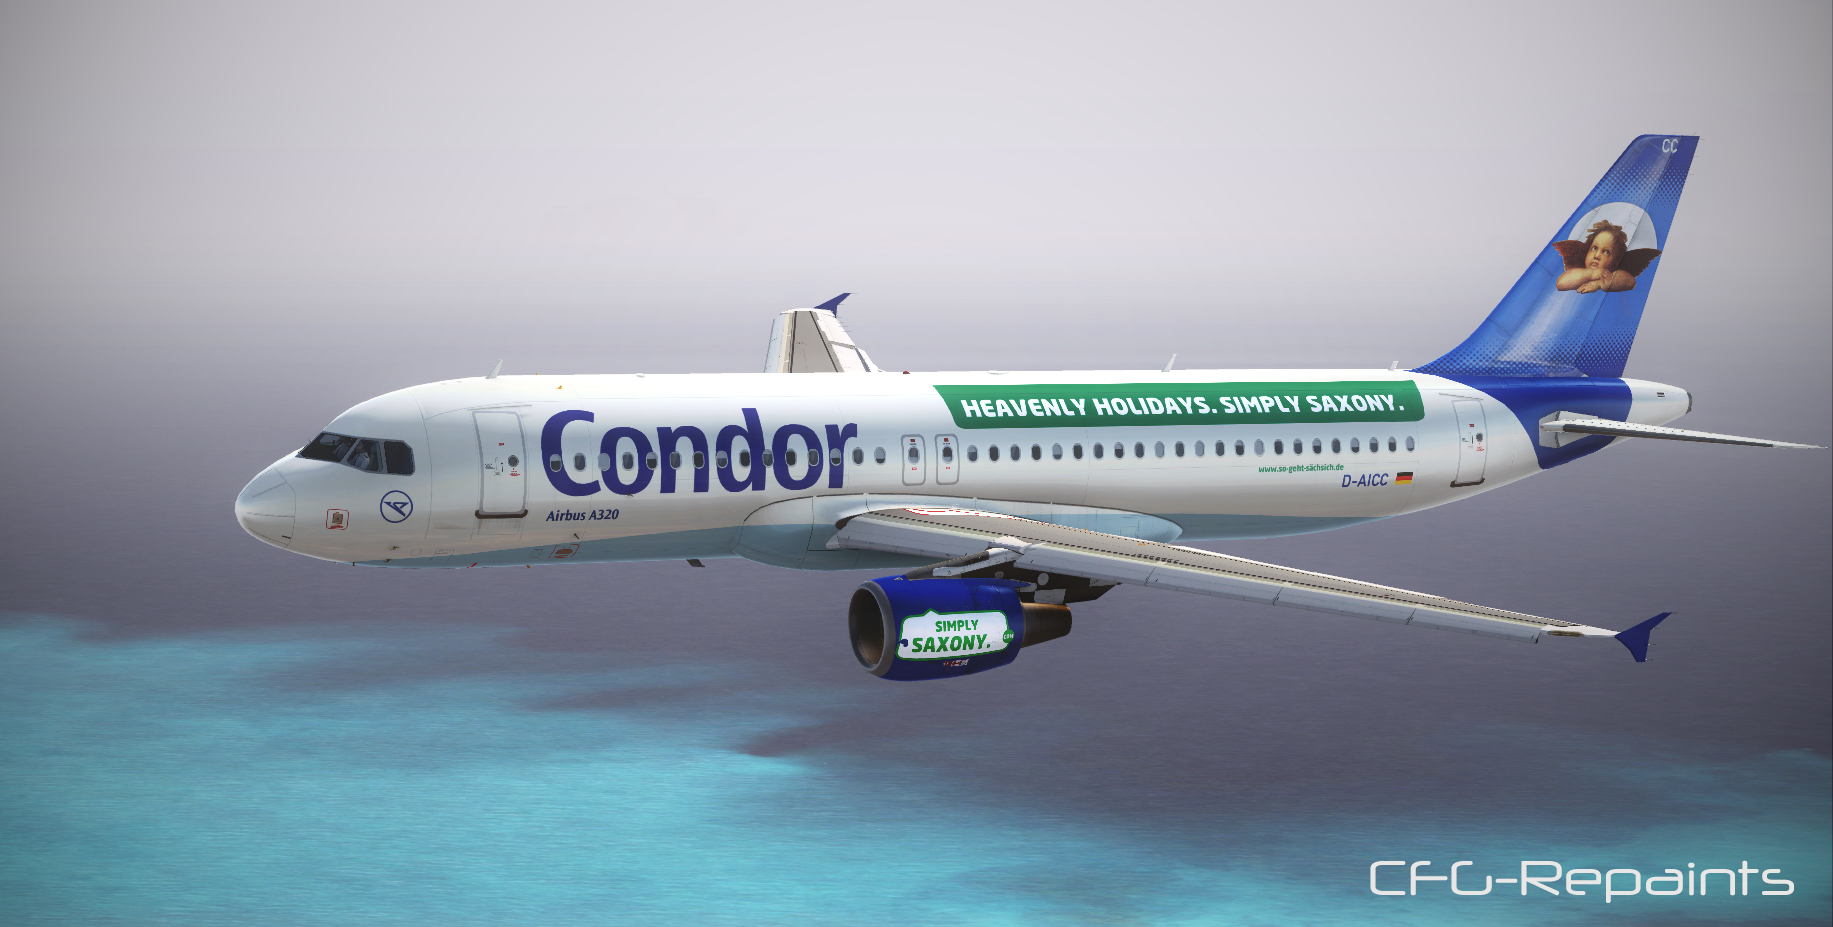 More information about "Airbus A320 CFM Condor "Simply Saxony""